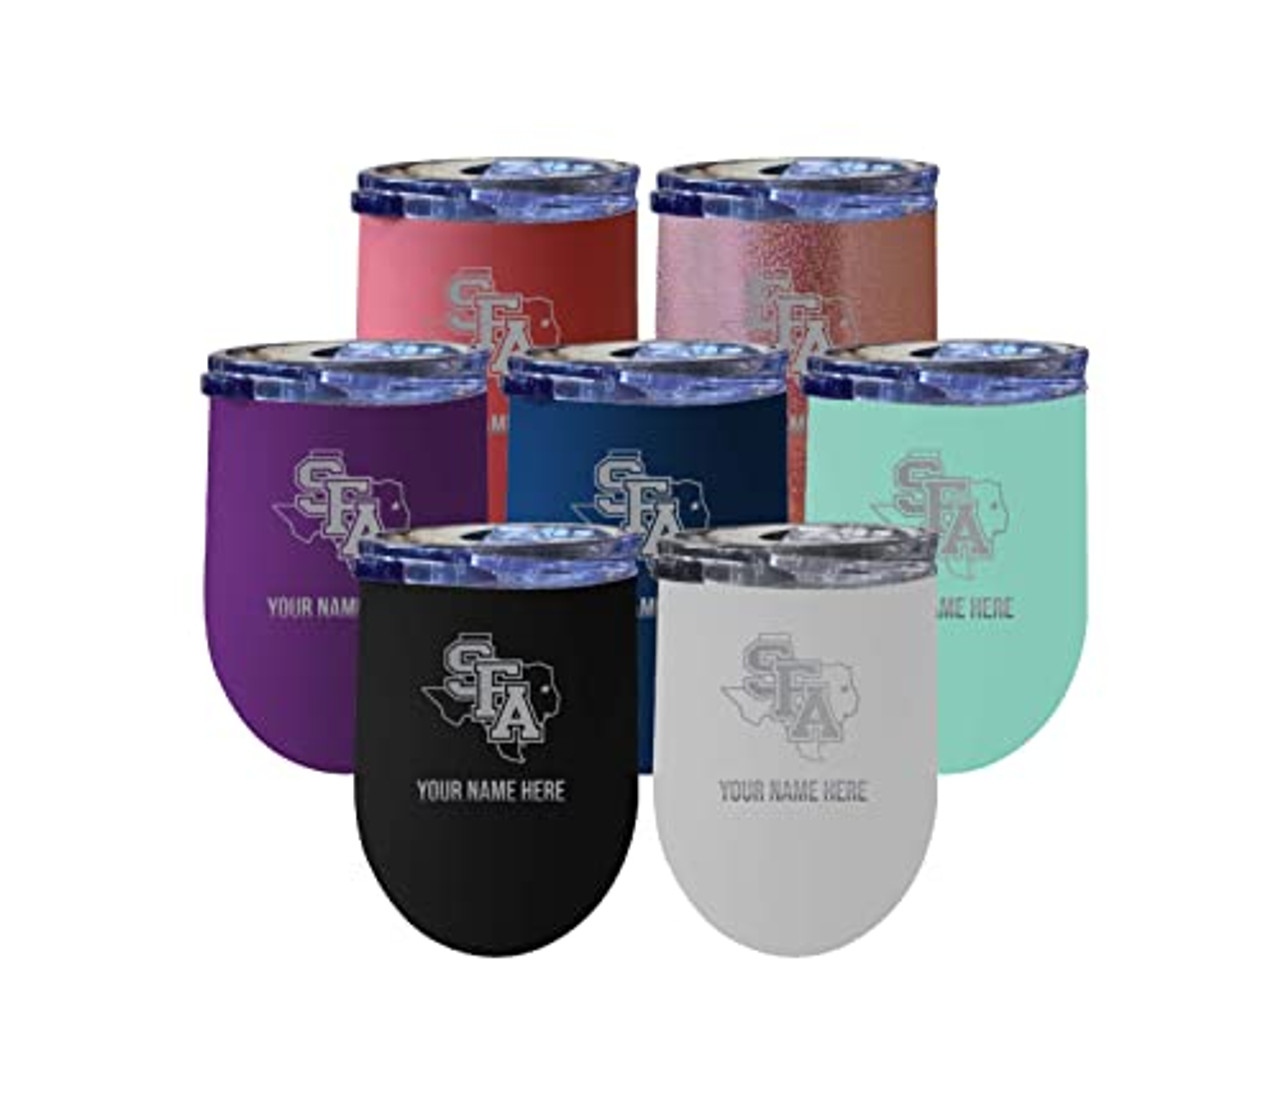 Collegiate Custom Personalized Stephen F. Austin State University 12 oz Etched Insulated Wine Stainless Steel Tumbler with Engraved Name